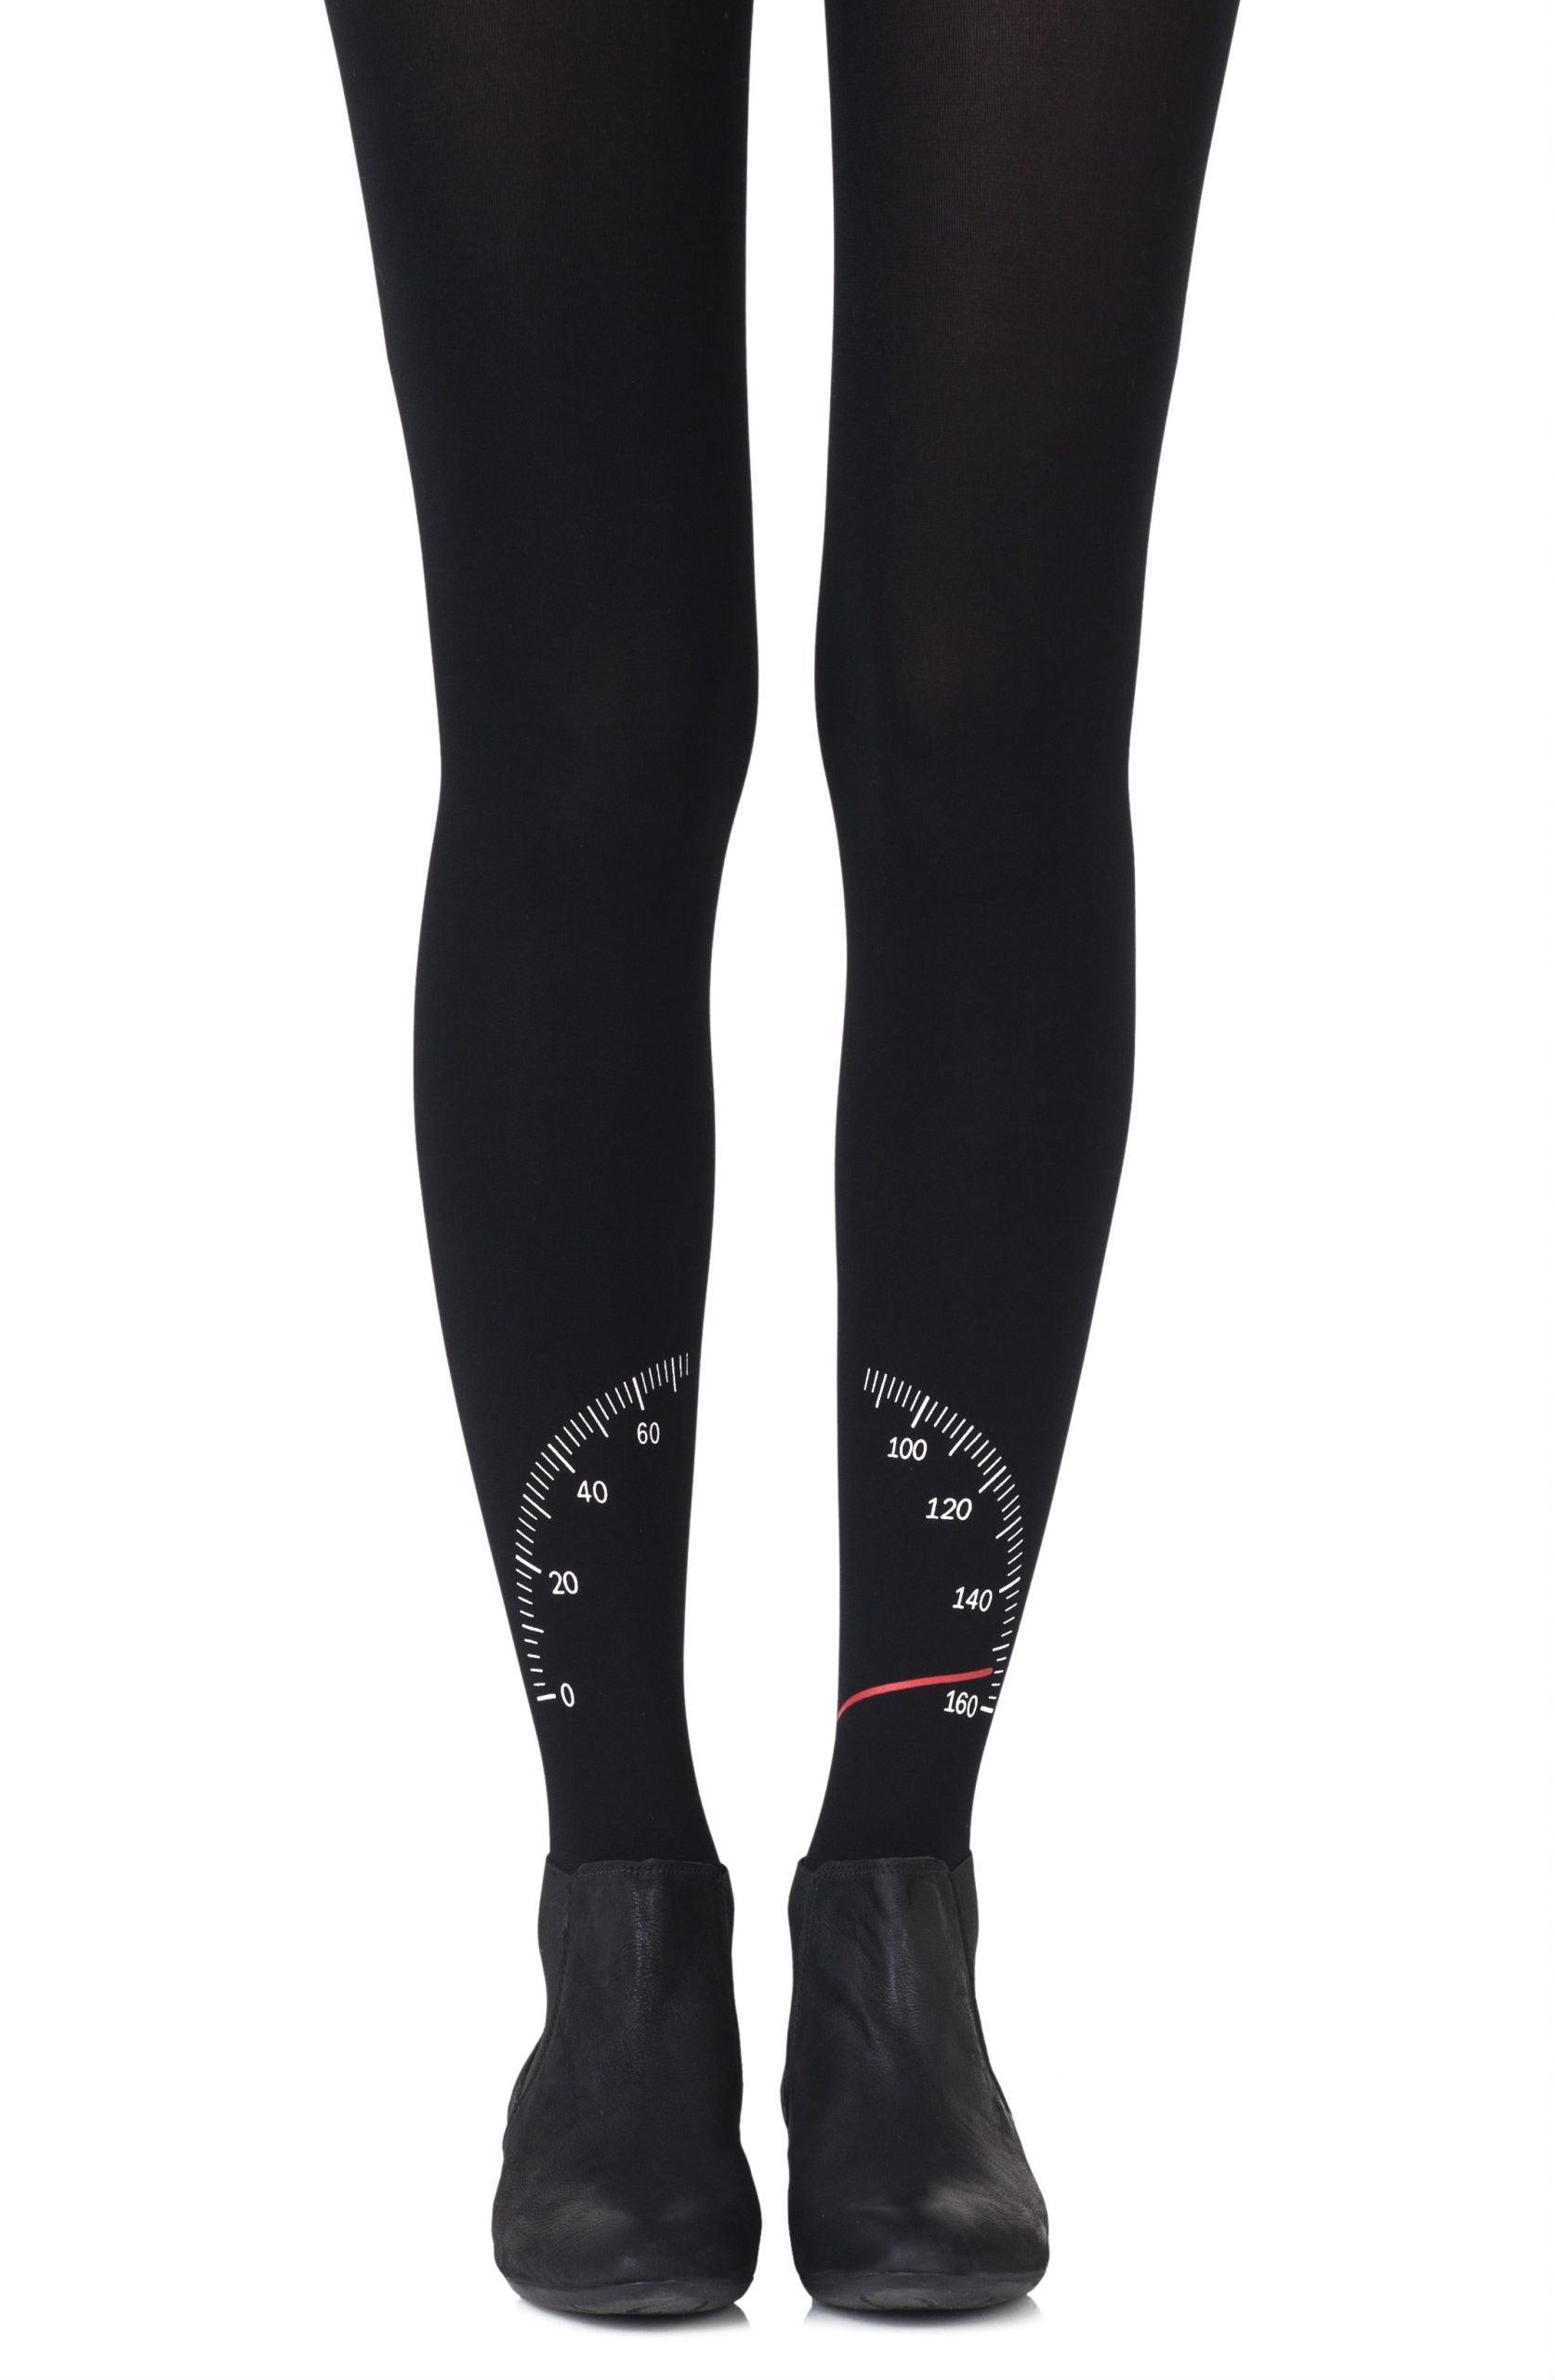 Zohara "To The Max" Multicolour Print Tights - Sydney Rose Lingerie 